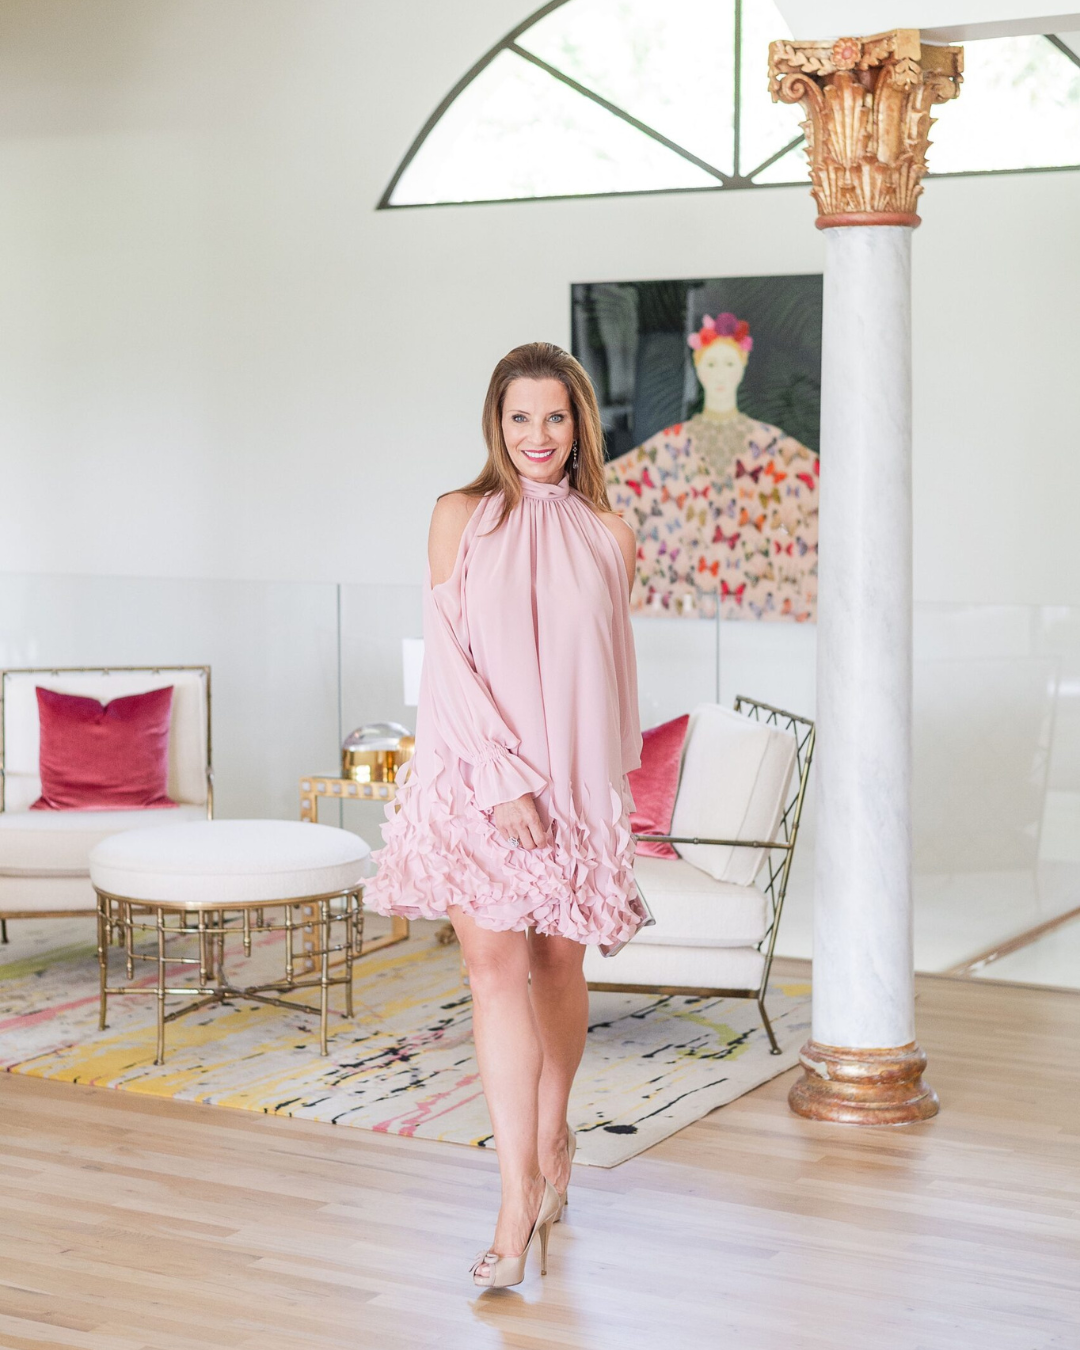 Easter Sunday Style Guide

easter, easter outfit, outfit guide, spring, spring outfit, spring fashion, easter fashion, easter style, spring style, pink dress, spring season